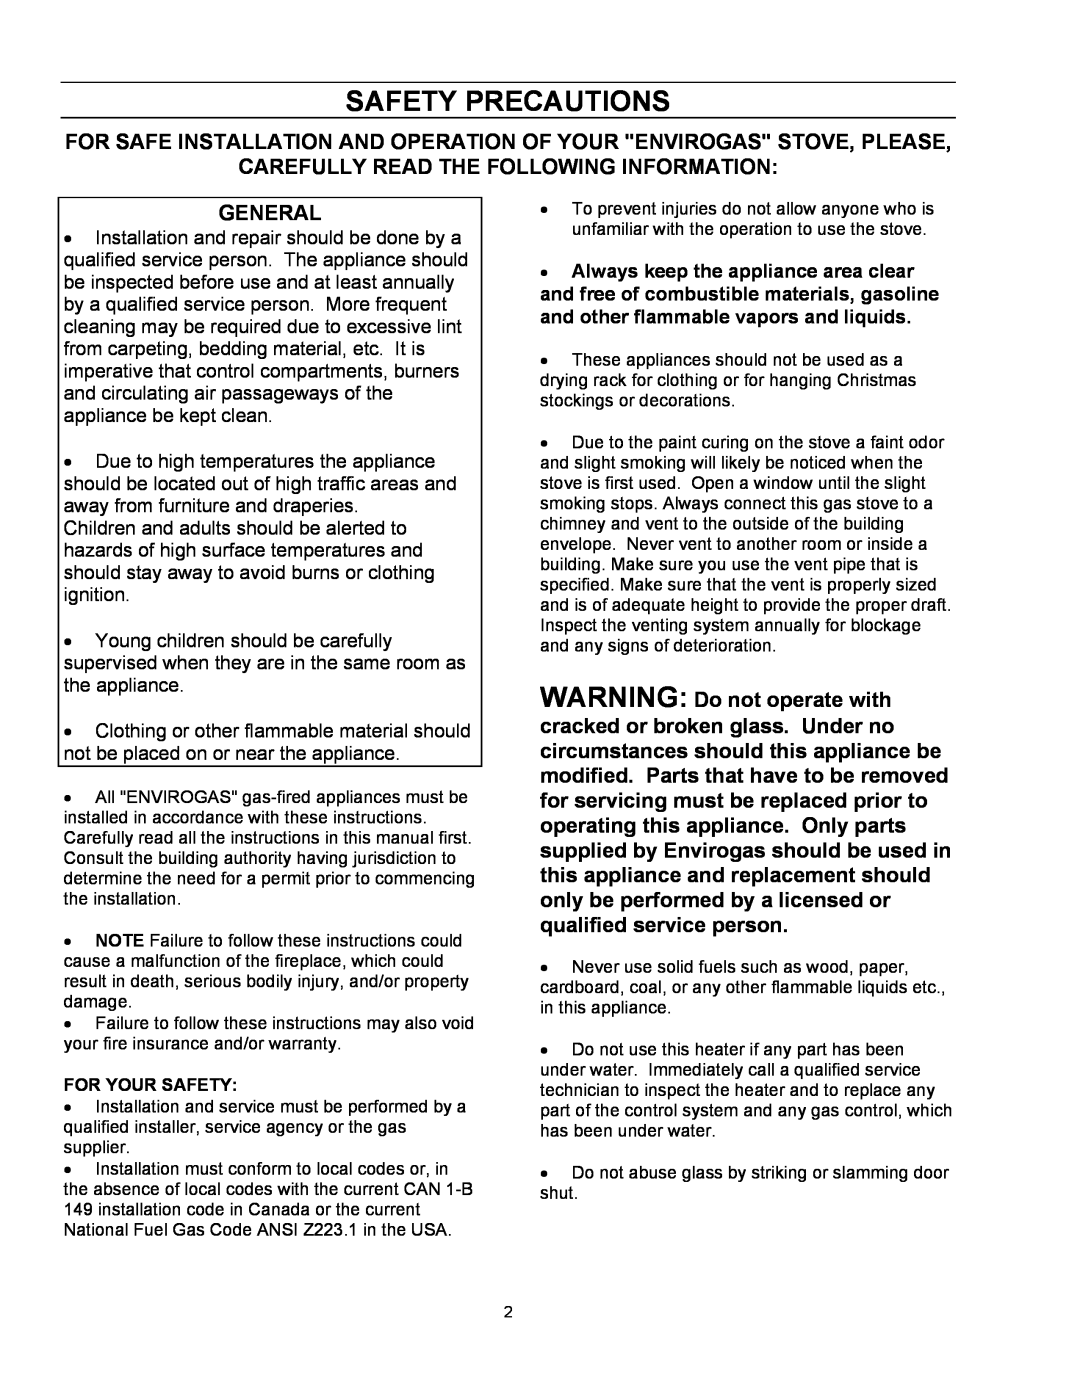 Enviro EG 28 owner manual Safety Precautions, Carefully Read The Following Information, General 